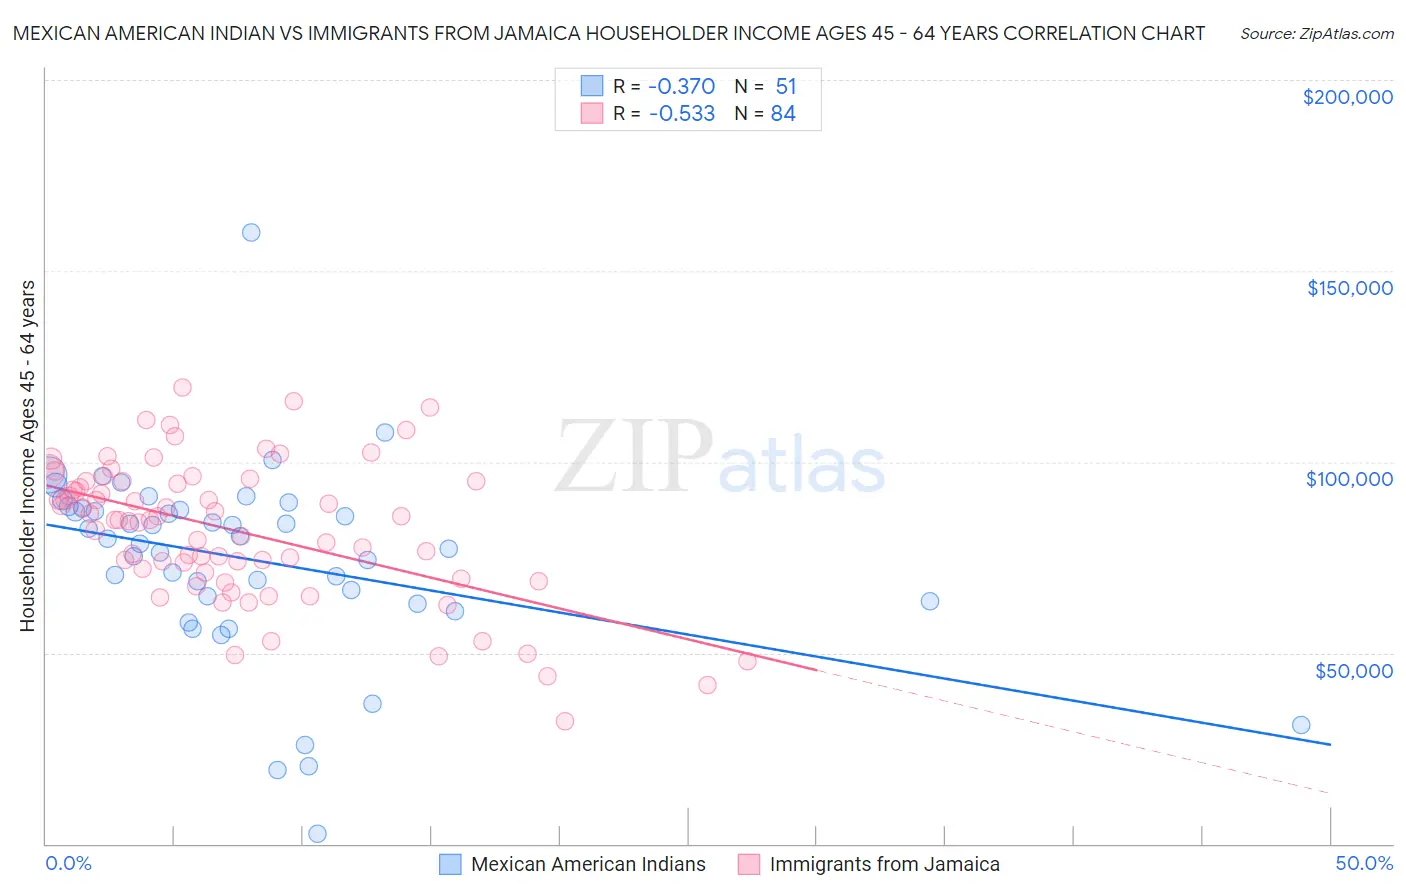 Mexican American Indian vs Immigrants from Jamaica Householder Income Ages 45 - 64 years